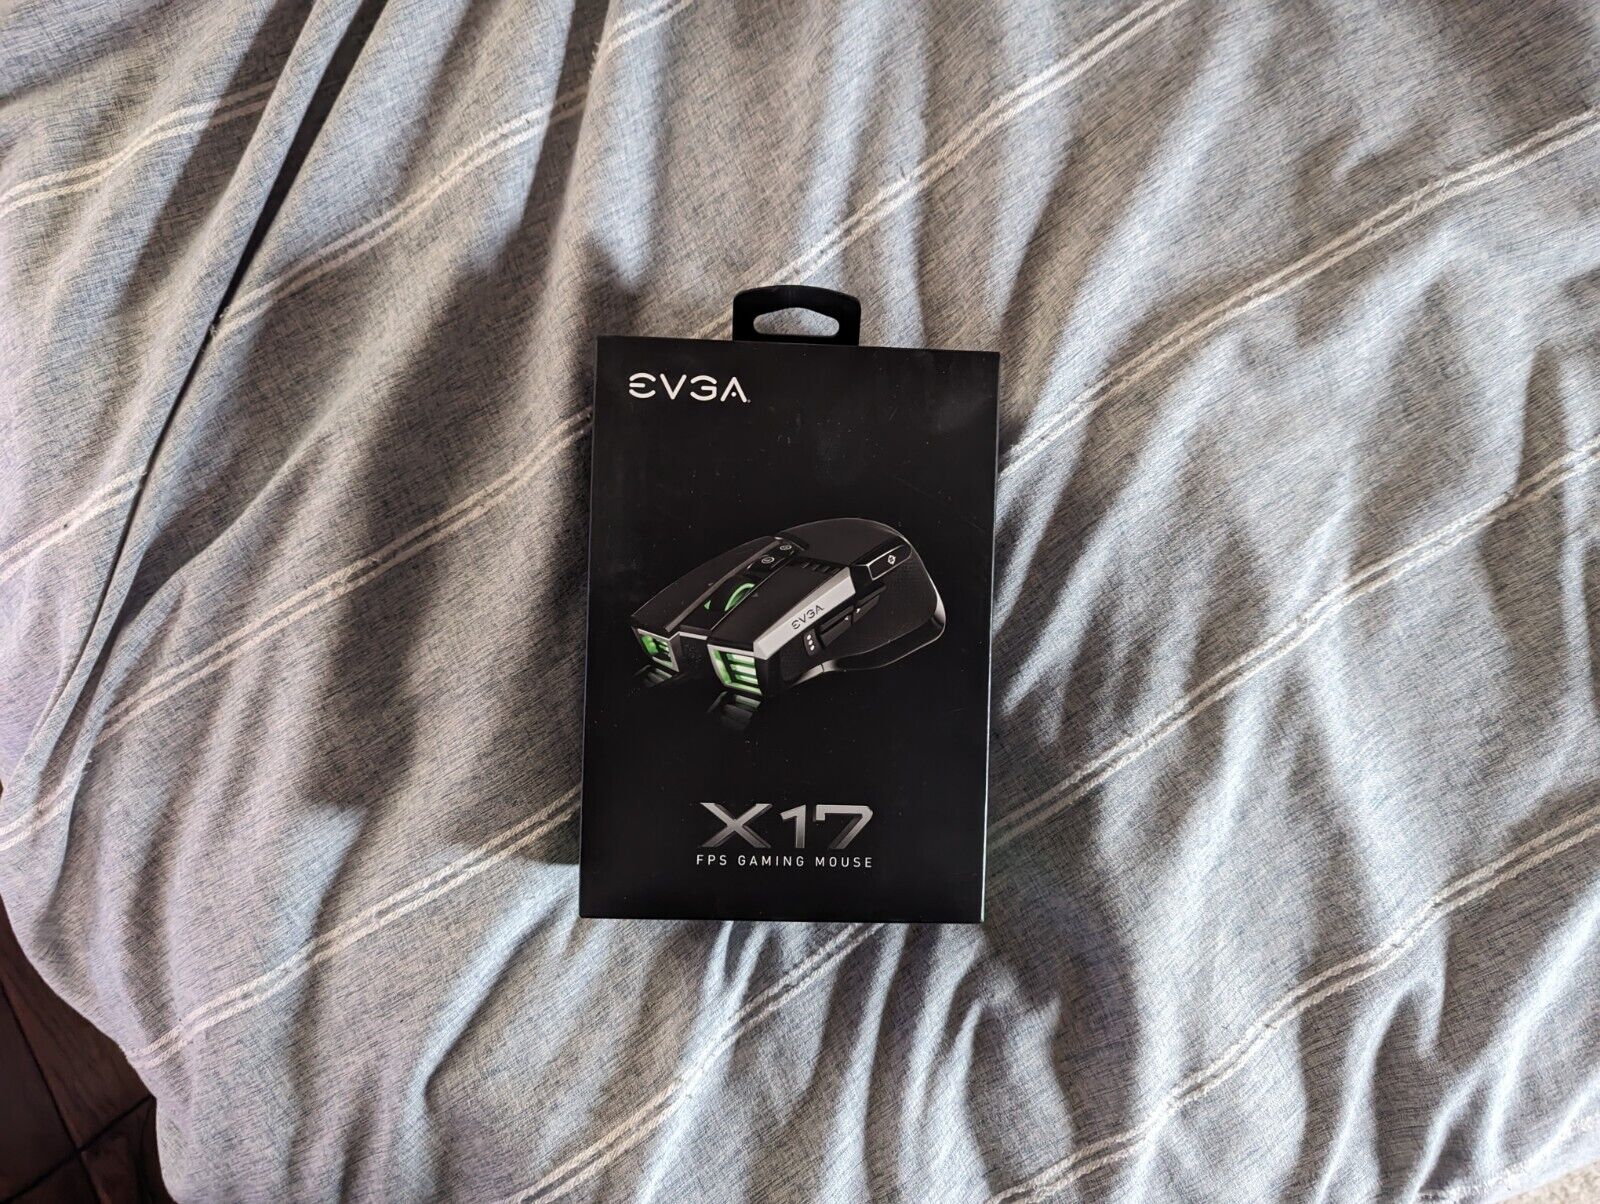 Brand New Sealed EVGA X17 Gaming Mouse Black, Sniper Button For FPS Games, RGB